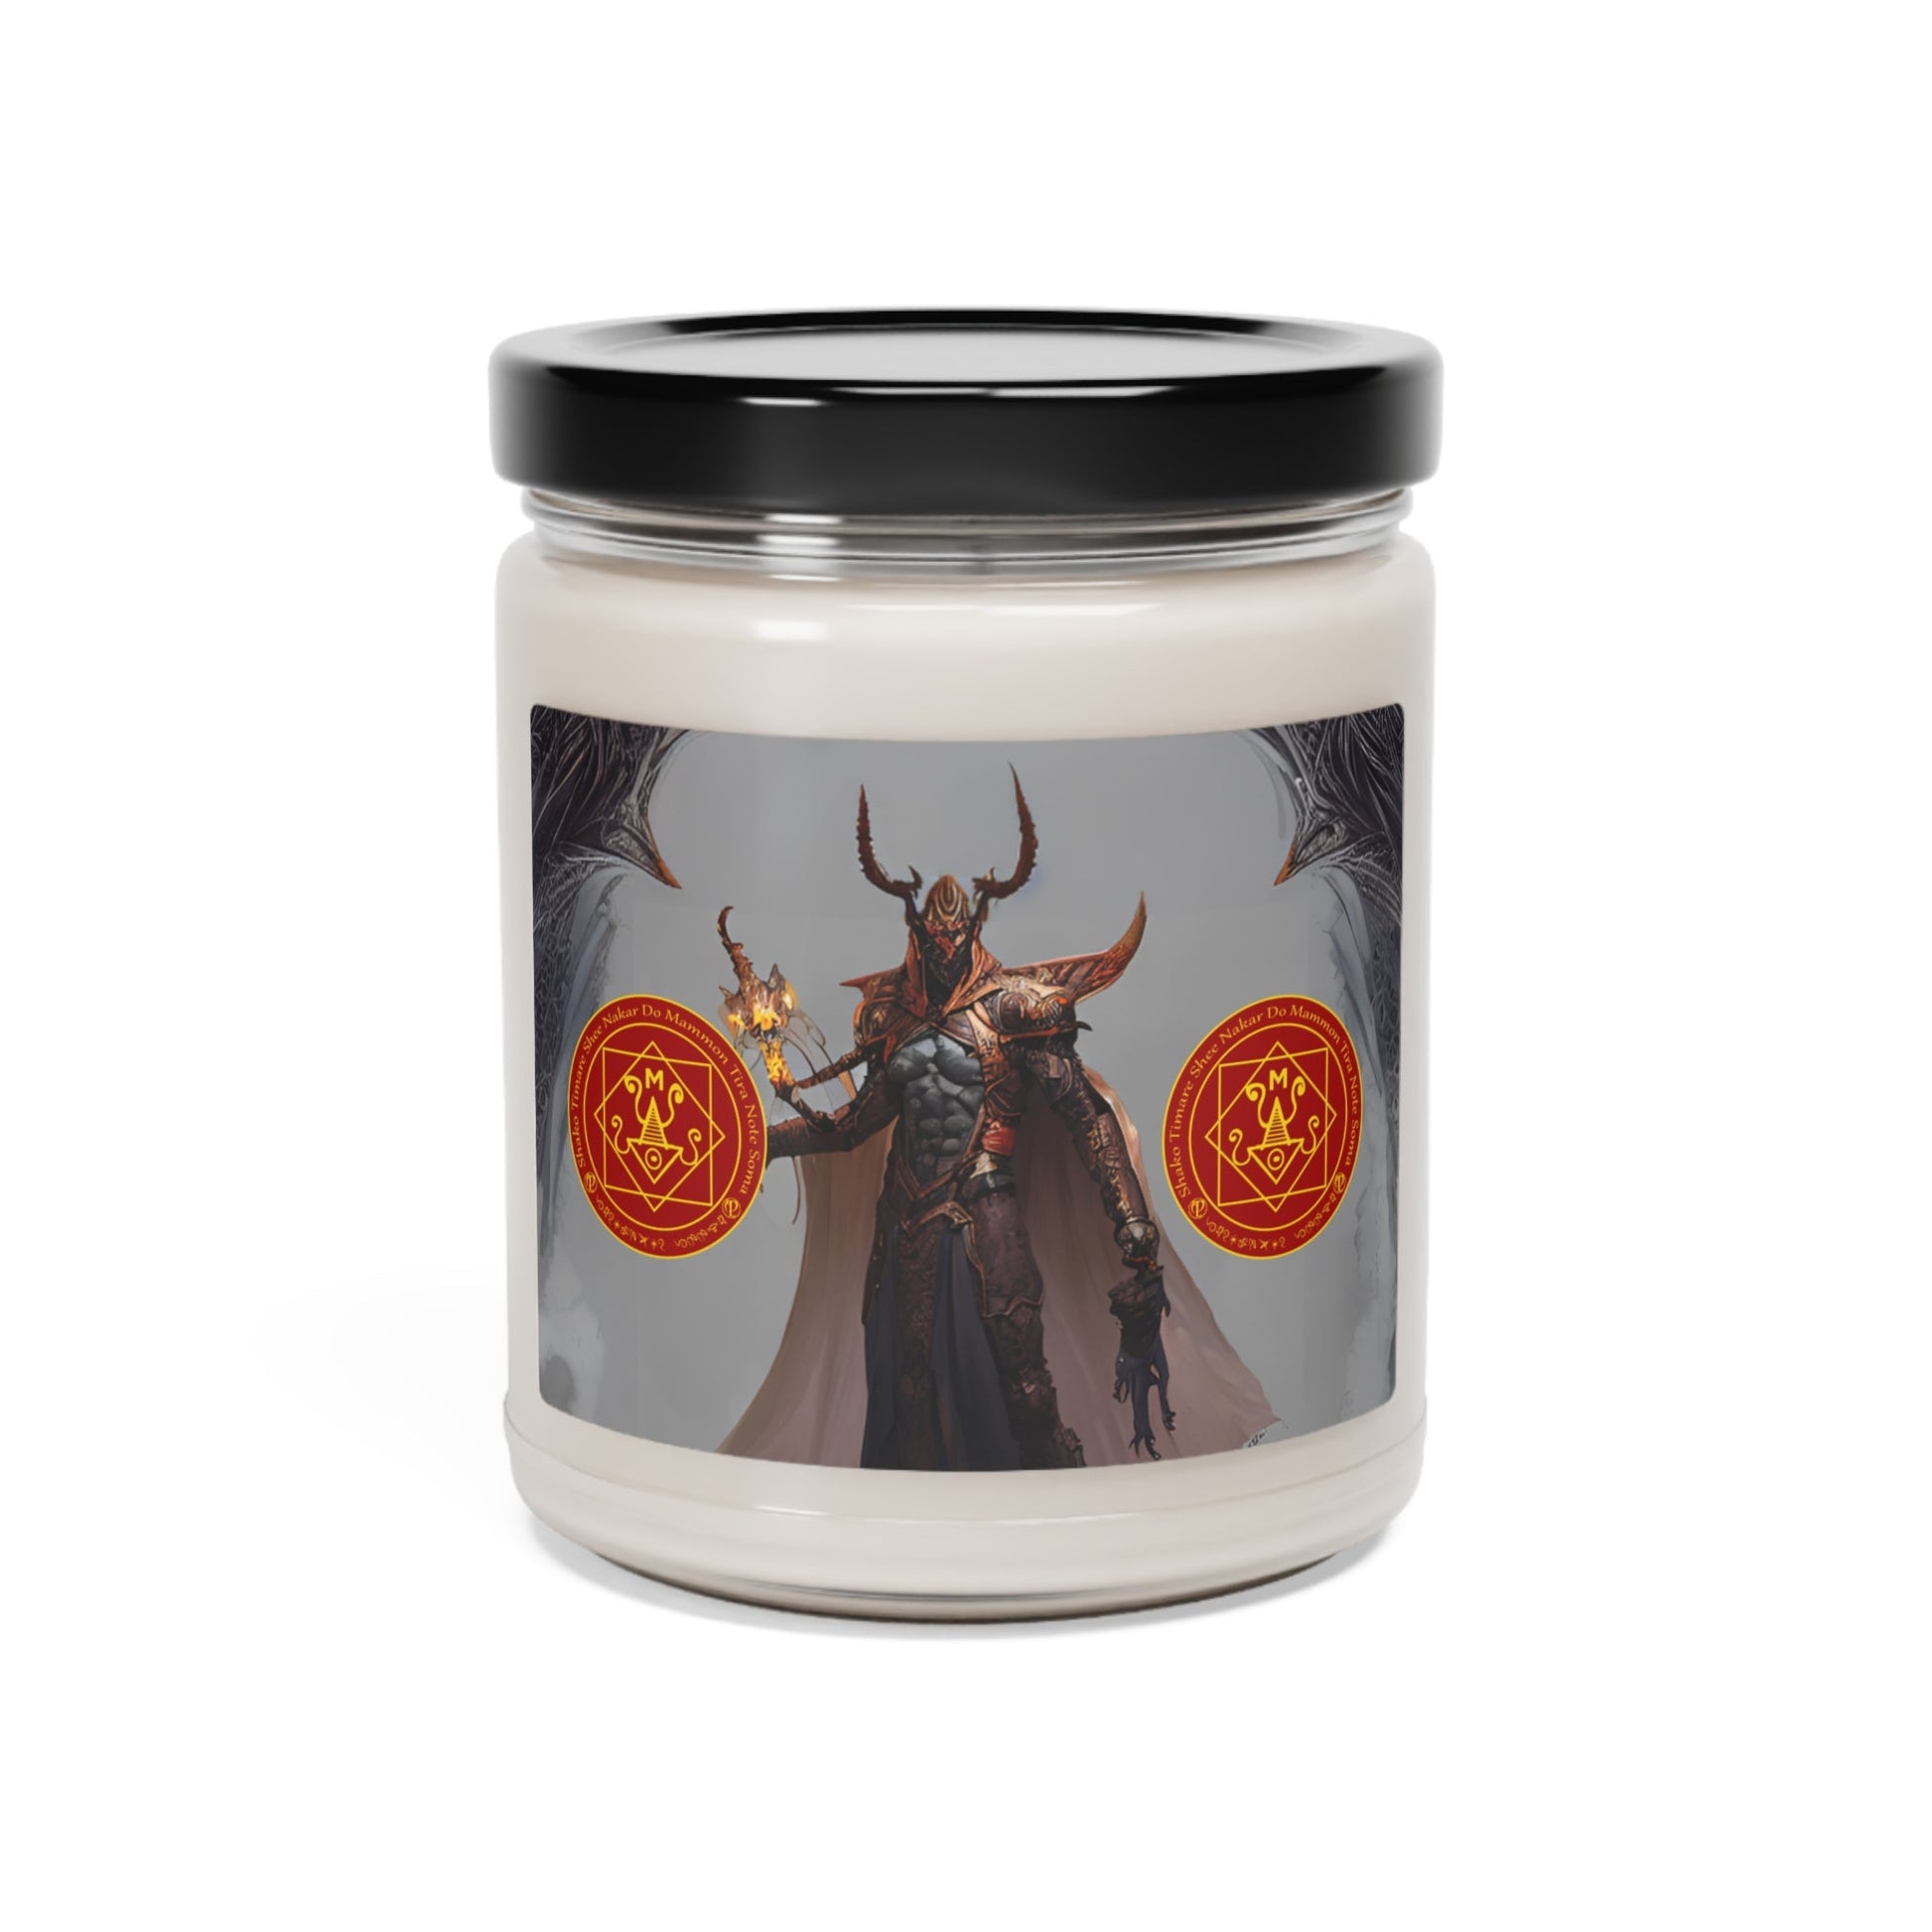 Demon-Mammon-Altar-Scented-Soy-Candle-for-Money-related-offerings-rituals-initiations-or-praying-and-meditation-6